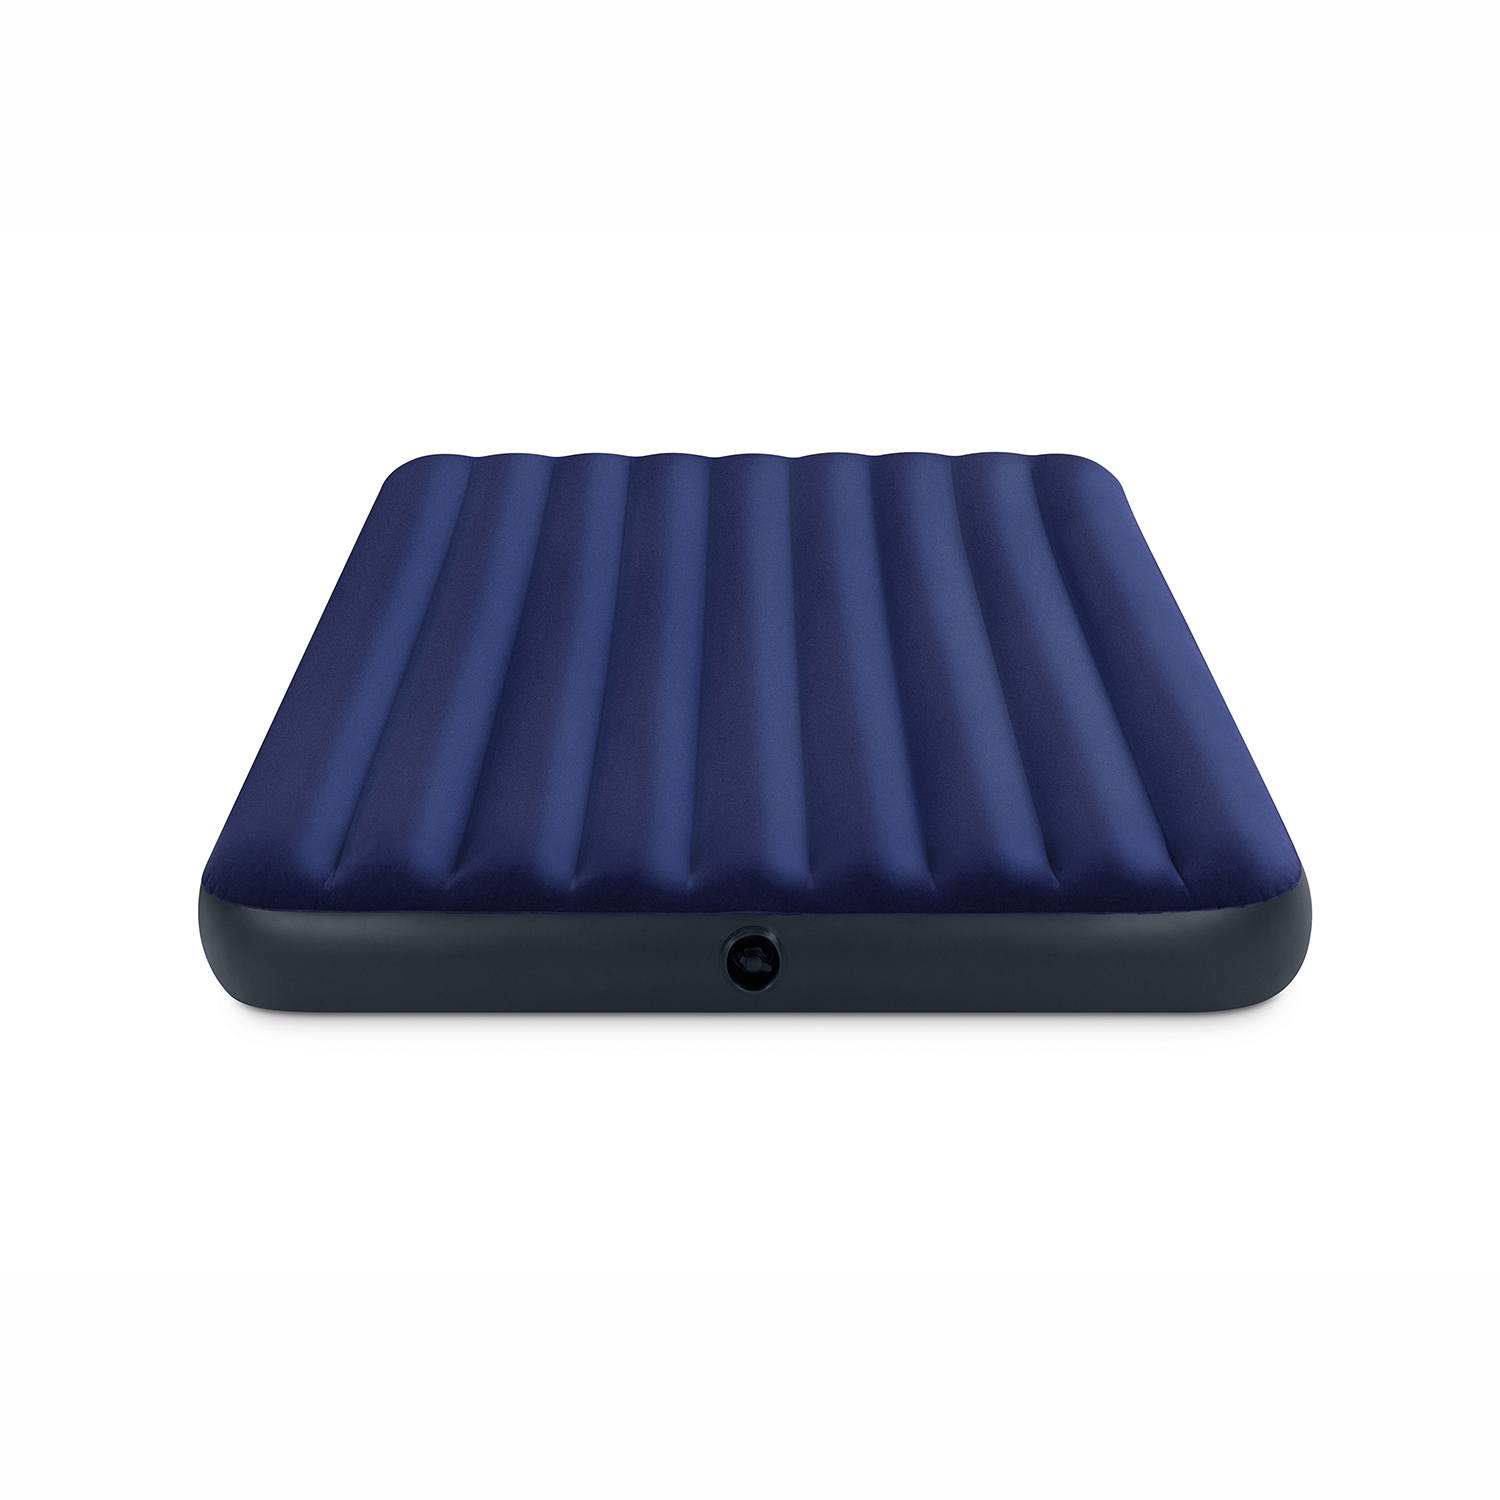 Intex 8.75" Classic Downy Inflatable Airbed Mattress, Queen - image 4 of 6